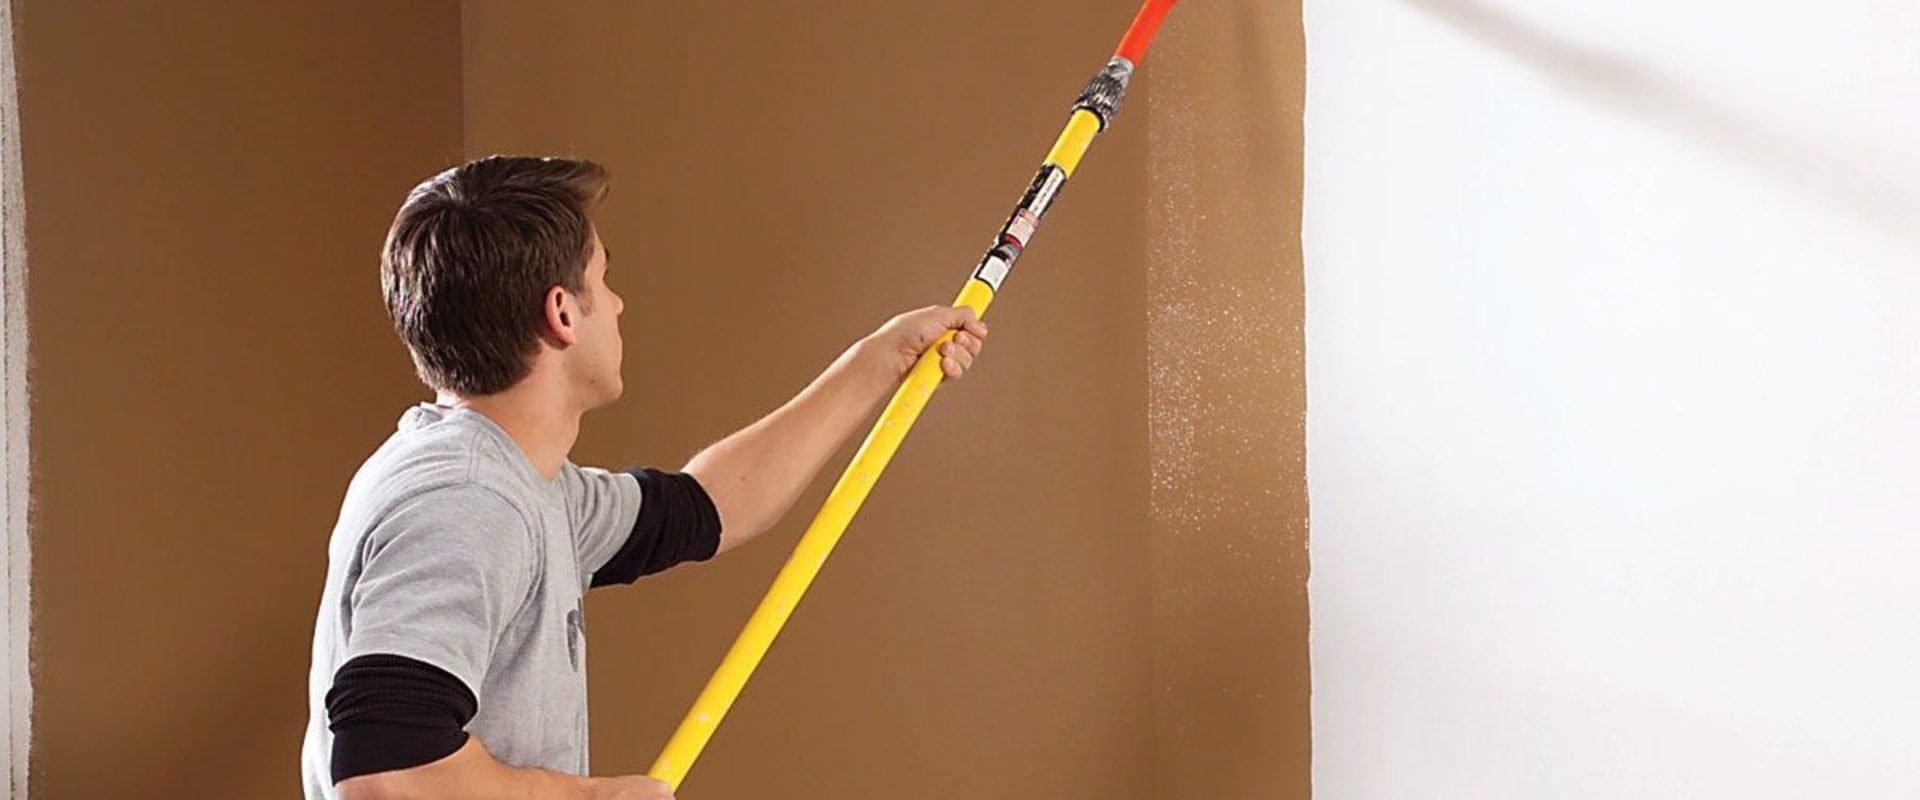 An Informative Article on Interior and Exterior Painting for Home Maintenance and Repairs